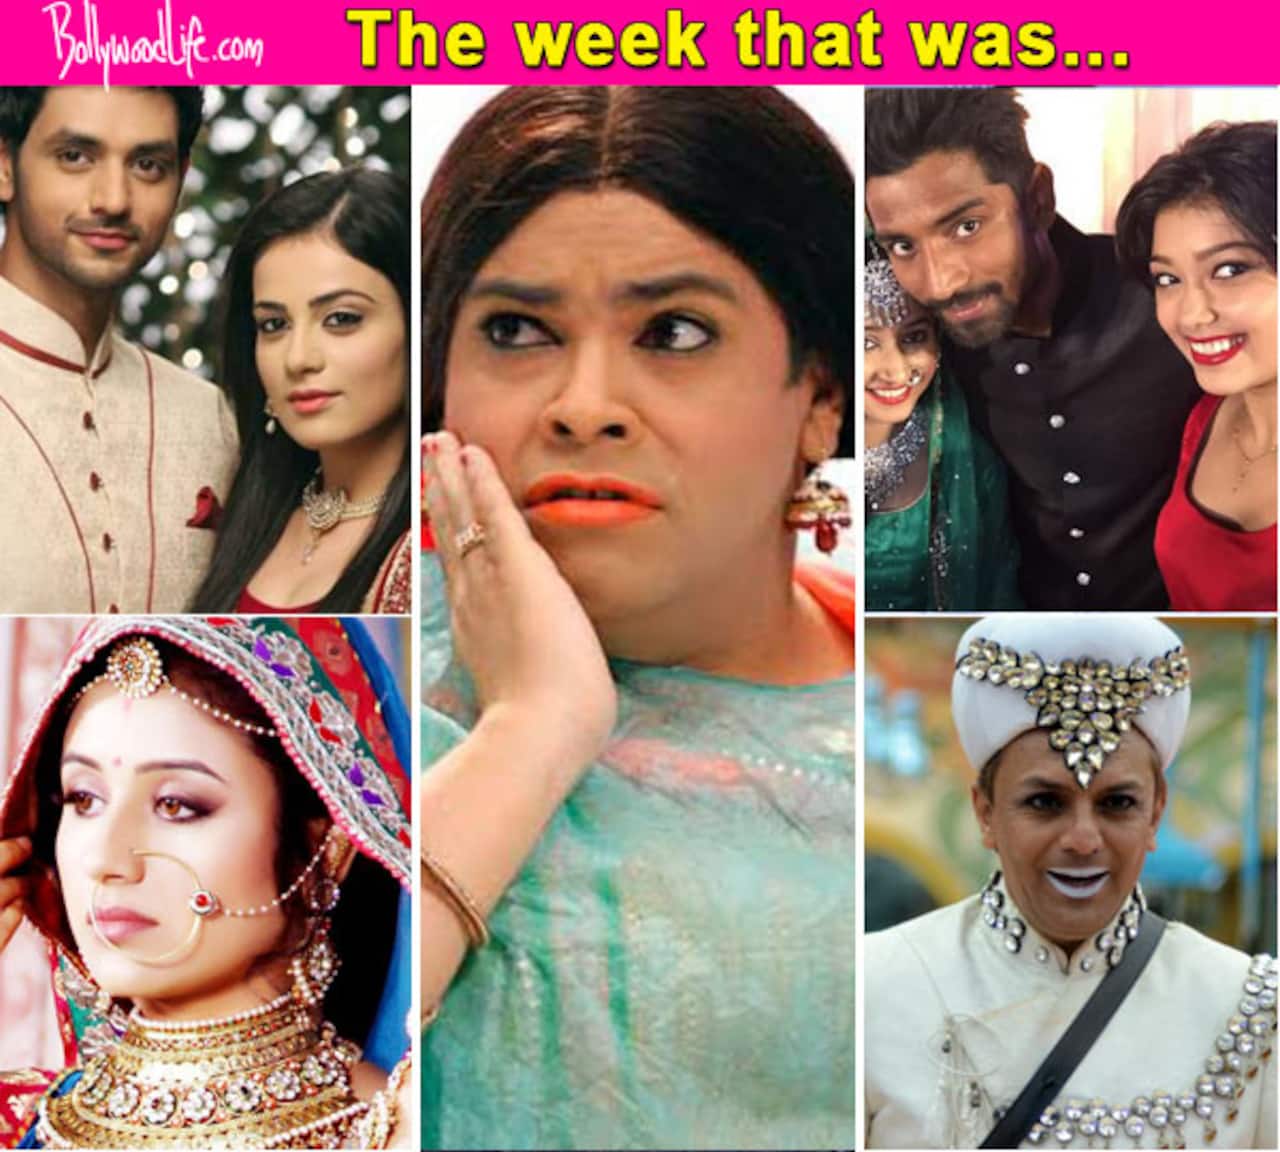 Kiku Sharda, Imam Siddique, Meri Aashiqui Tumse Hi - Here's a look at the top newsmakers on TV this week!